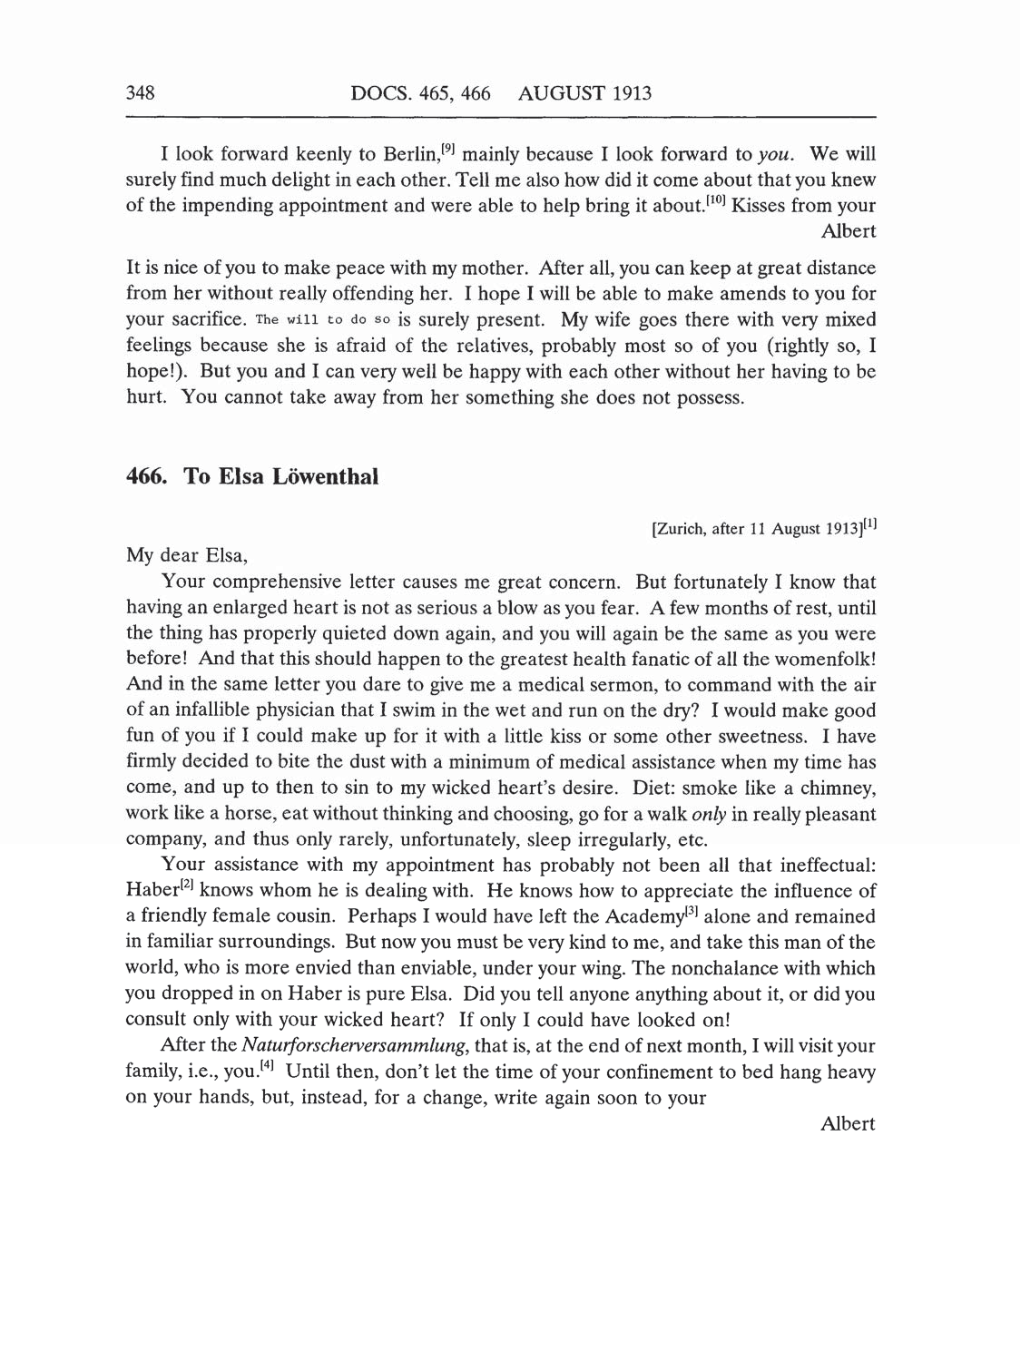 Volume 5: The Swiss Years: Correspondence, 1902-1914 (English translation supplement) page 348